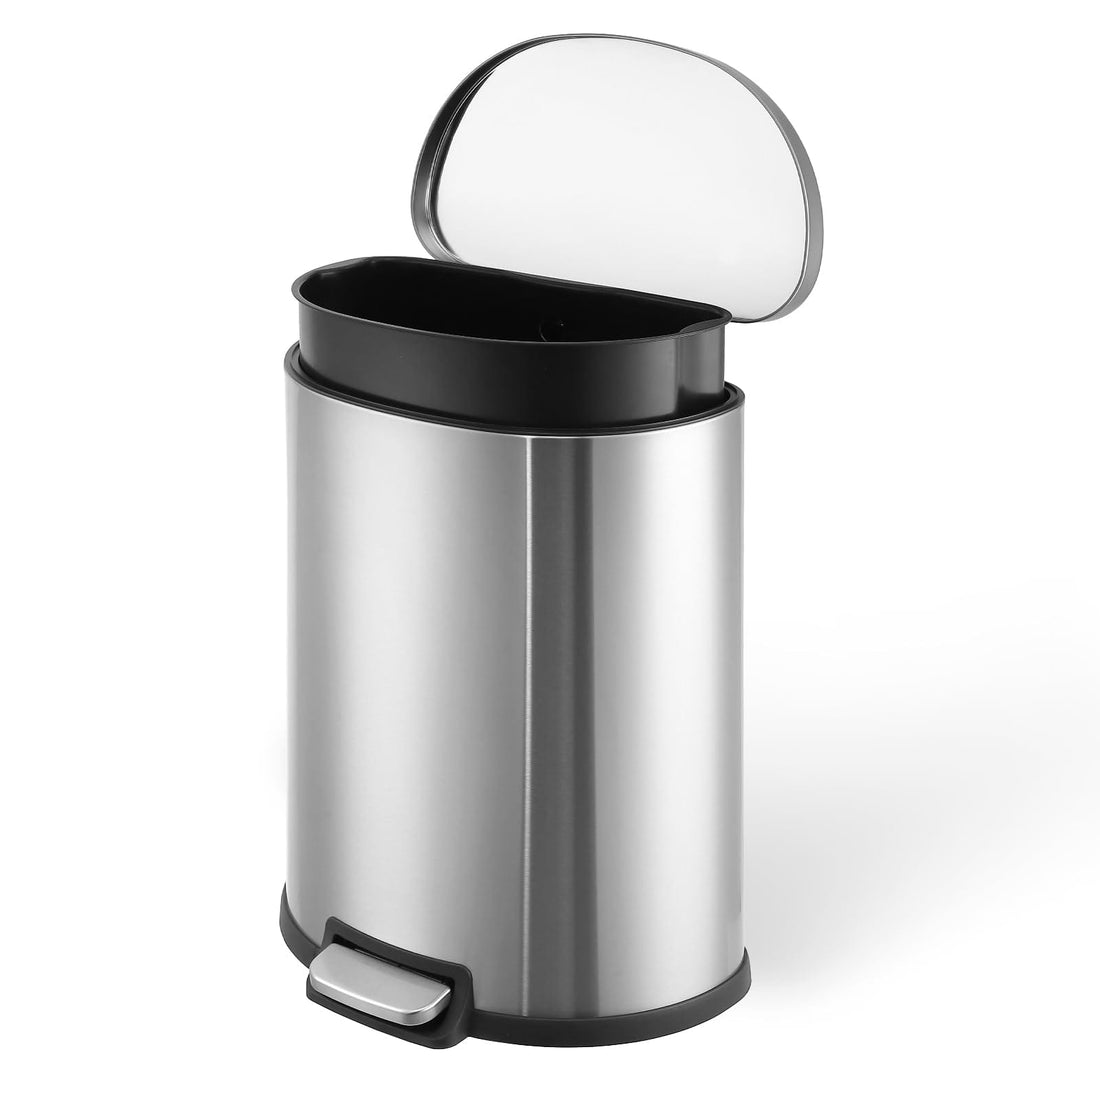 50L Trash Can Semi-Circular Steel Pedal Recycle Bin with Lid and Inner Buckets Hands-Free